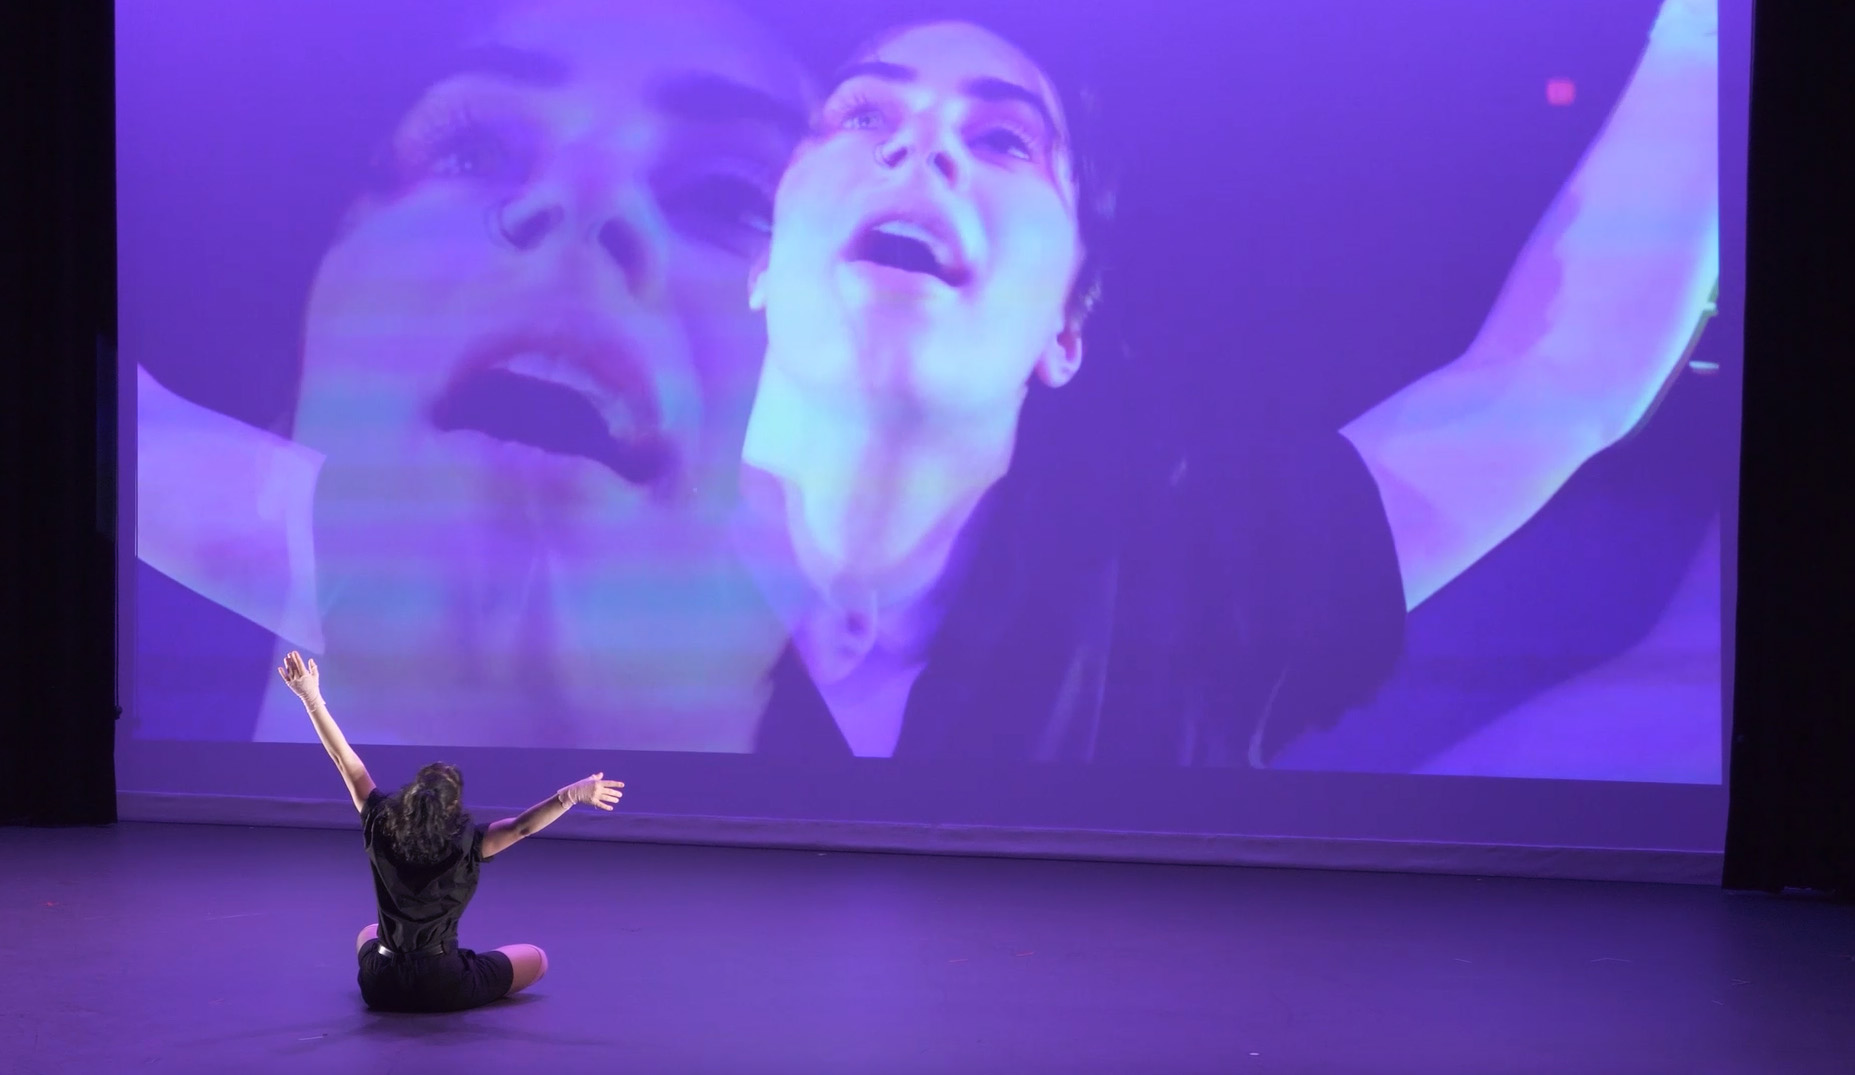 An individual sits on a stage wearing black with raised arms, facing a large screen image of a magnified reflection of themself.